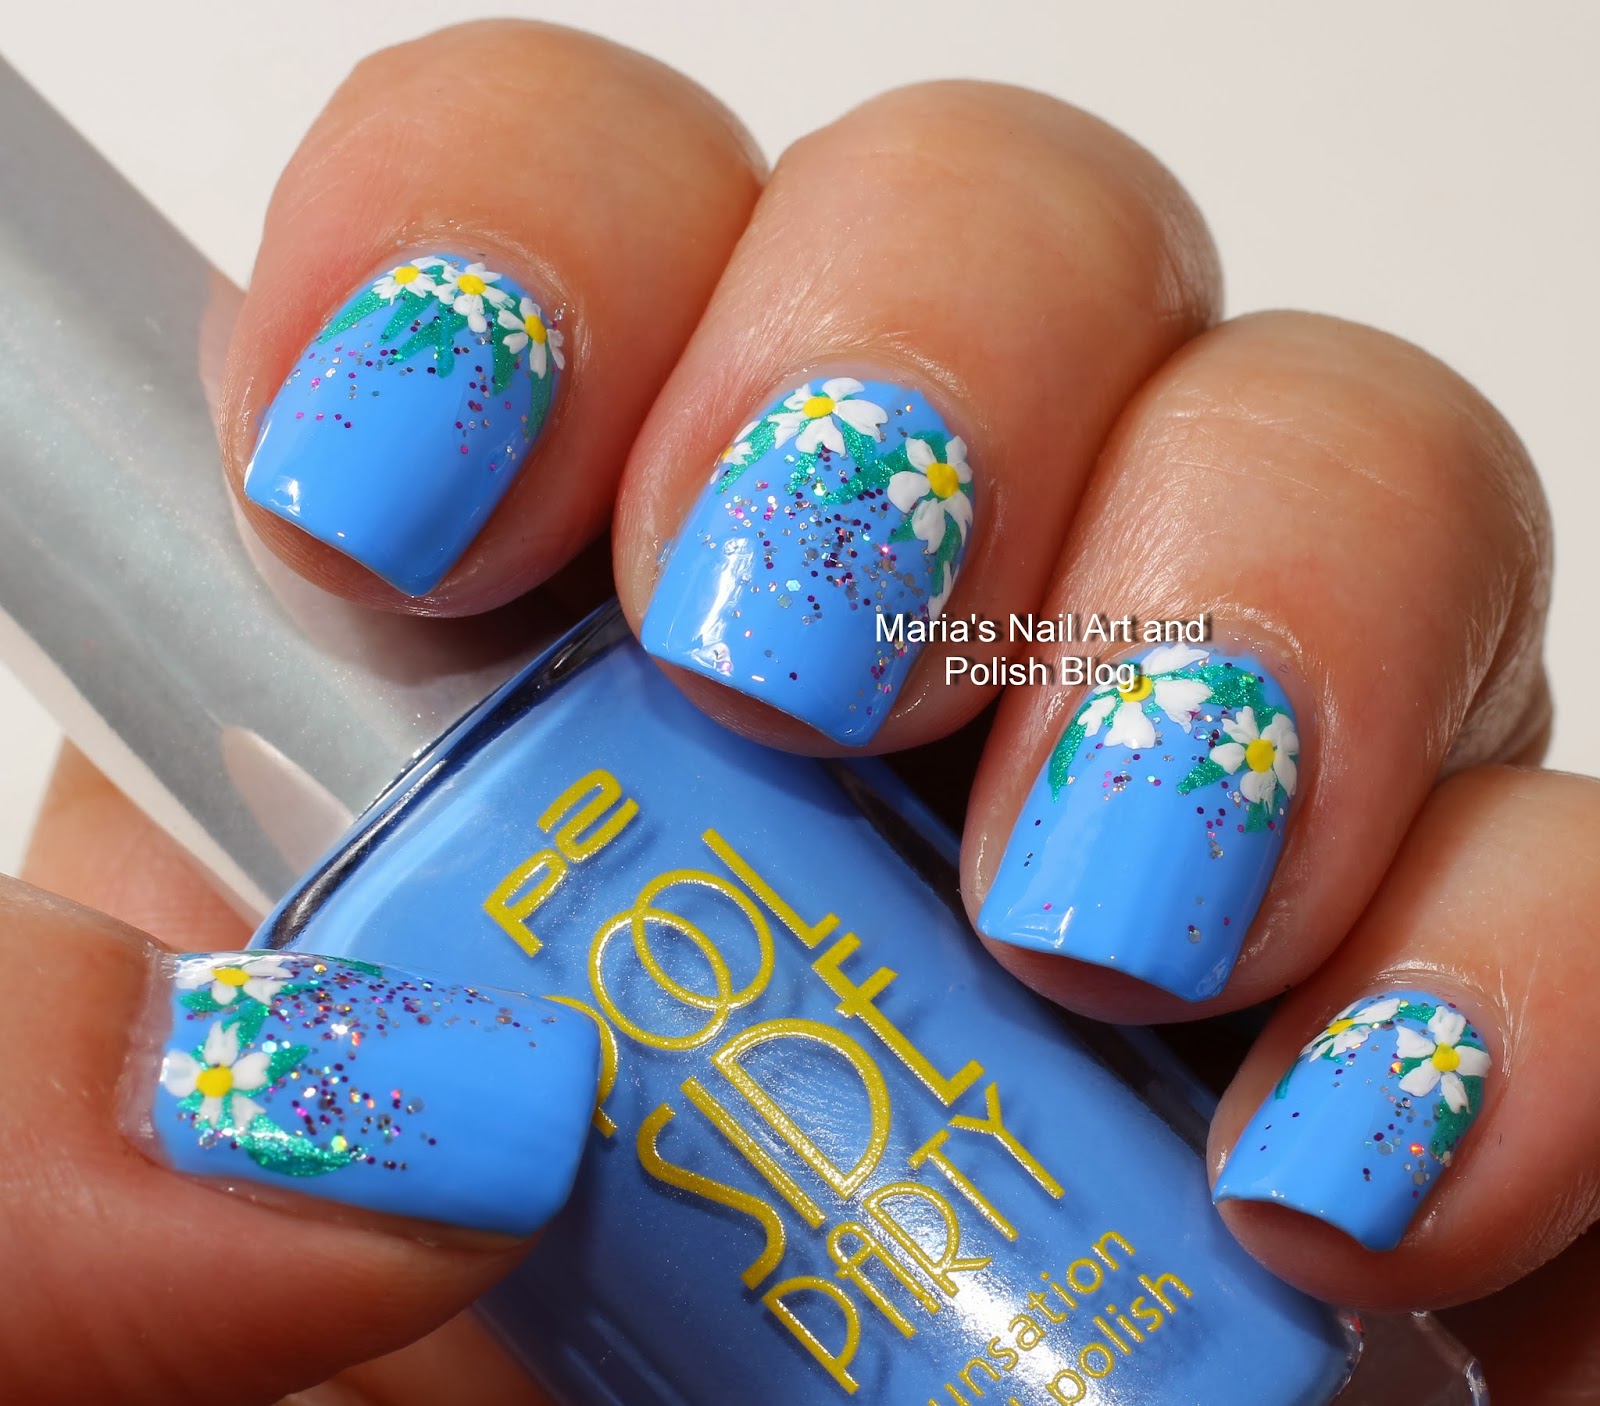 Marias Nail Art and Polish Blog: Flowers in the new wave